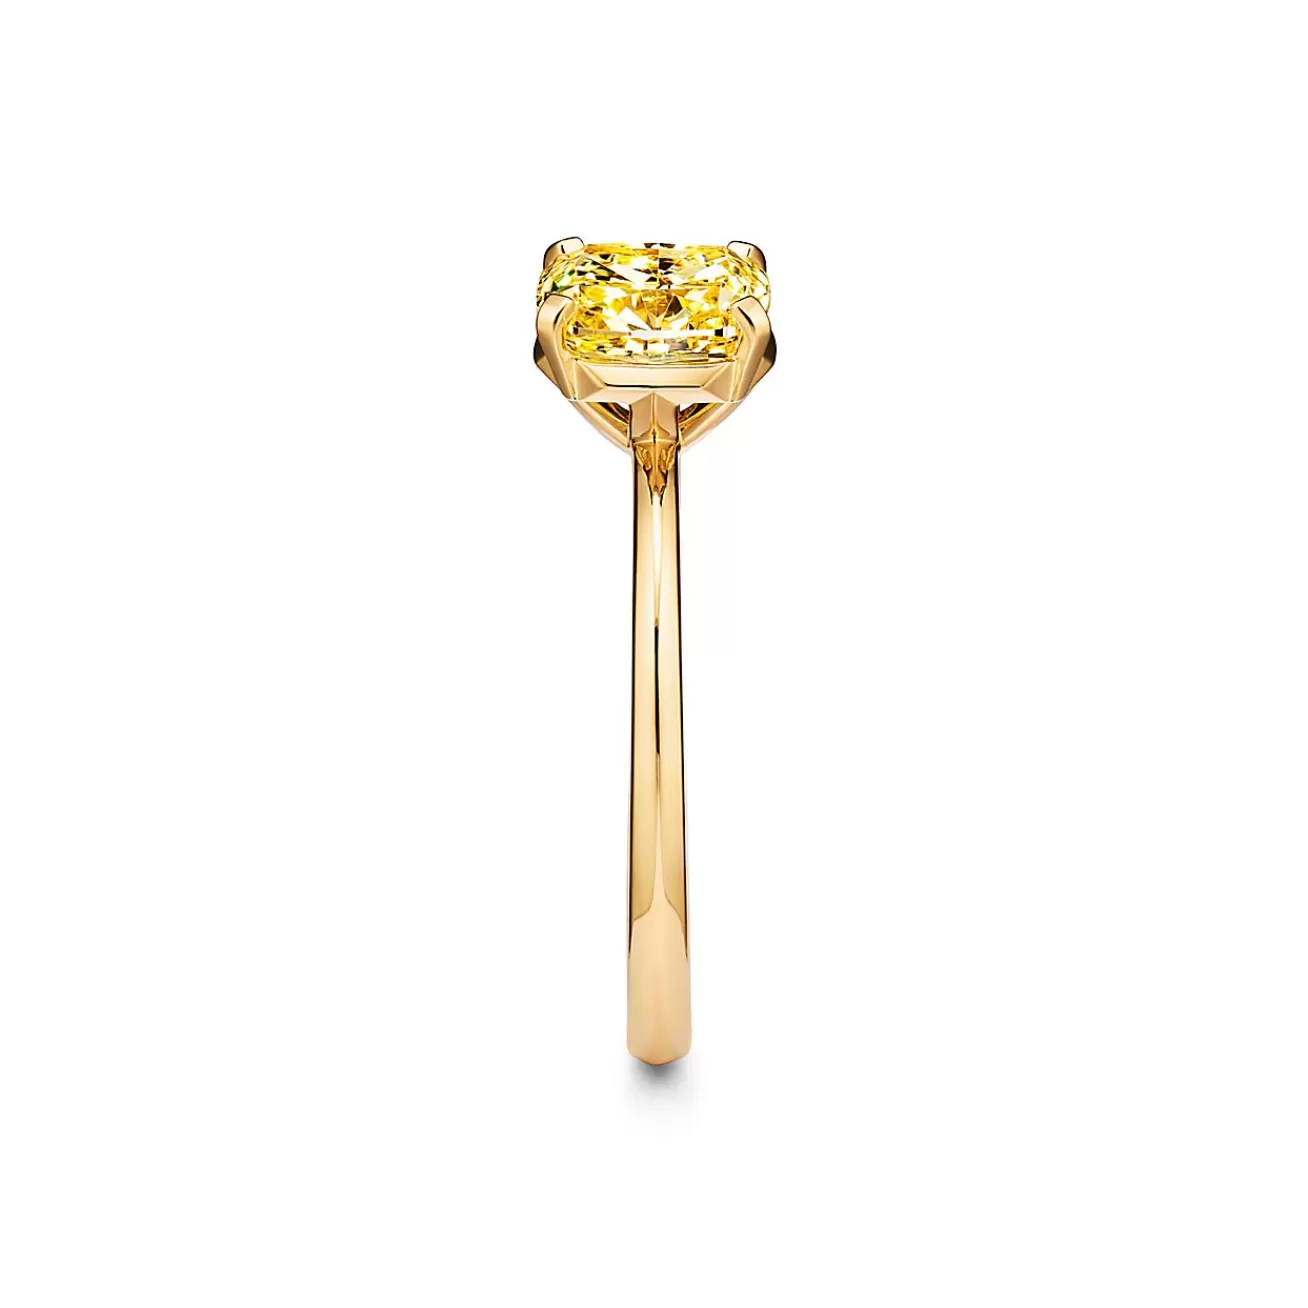 Tiffany & Co. Tiffany True® yellow diamond engagement ring in 18k gold: an icon of modern love | ^ Engagement Rings